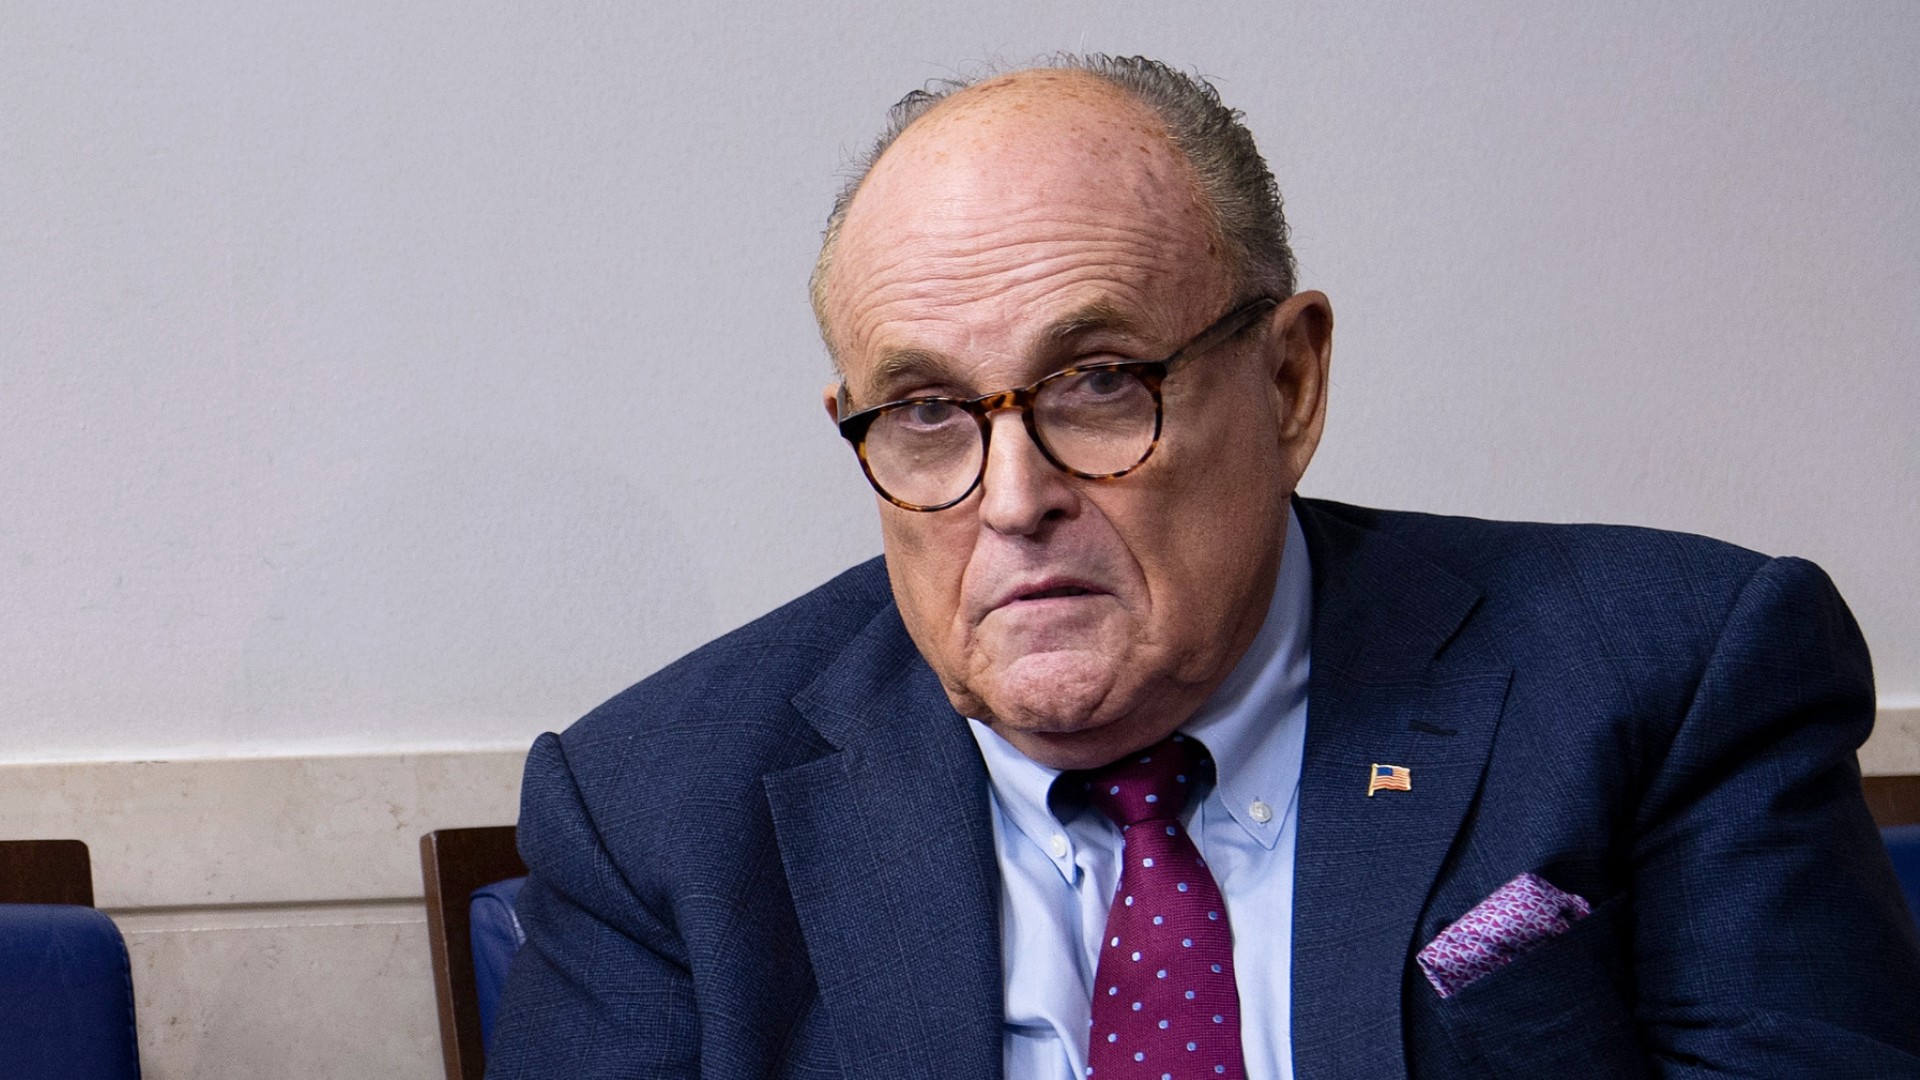 Giuliani’s Lawyer Accuses DOJ of ‘Corrupt Double Standard’ In Executing Warrants Against Him